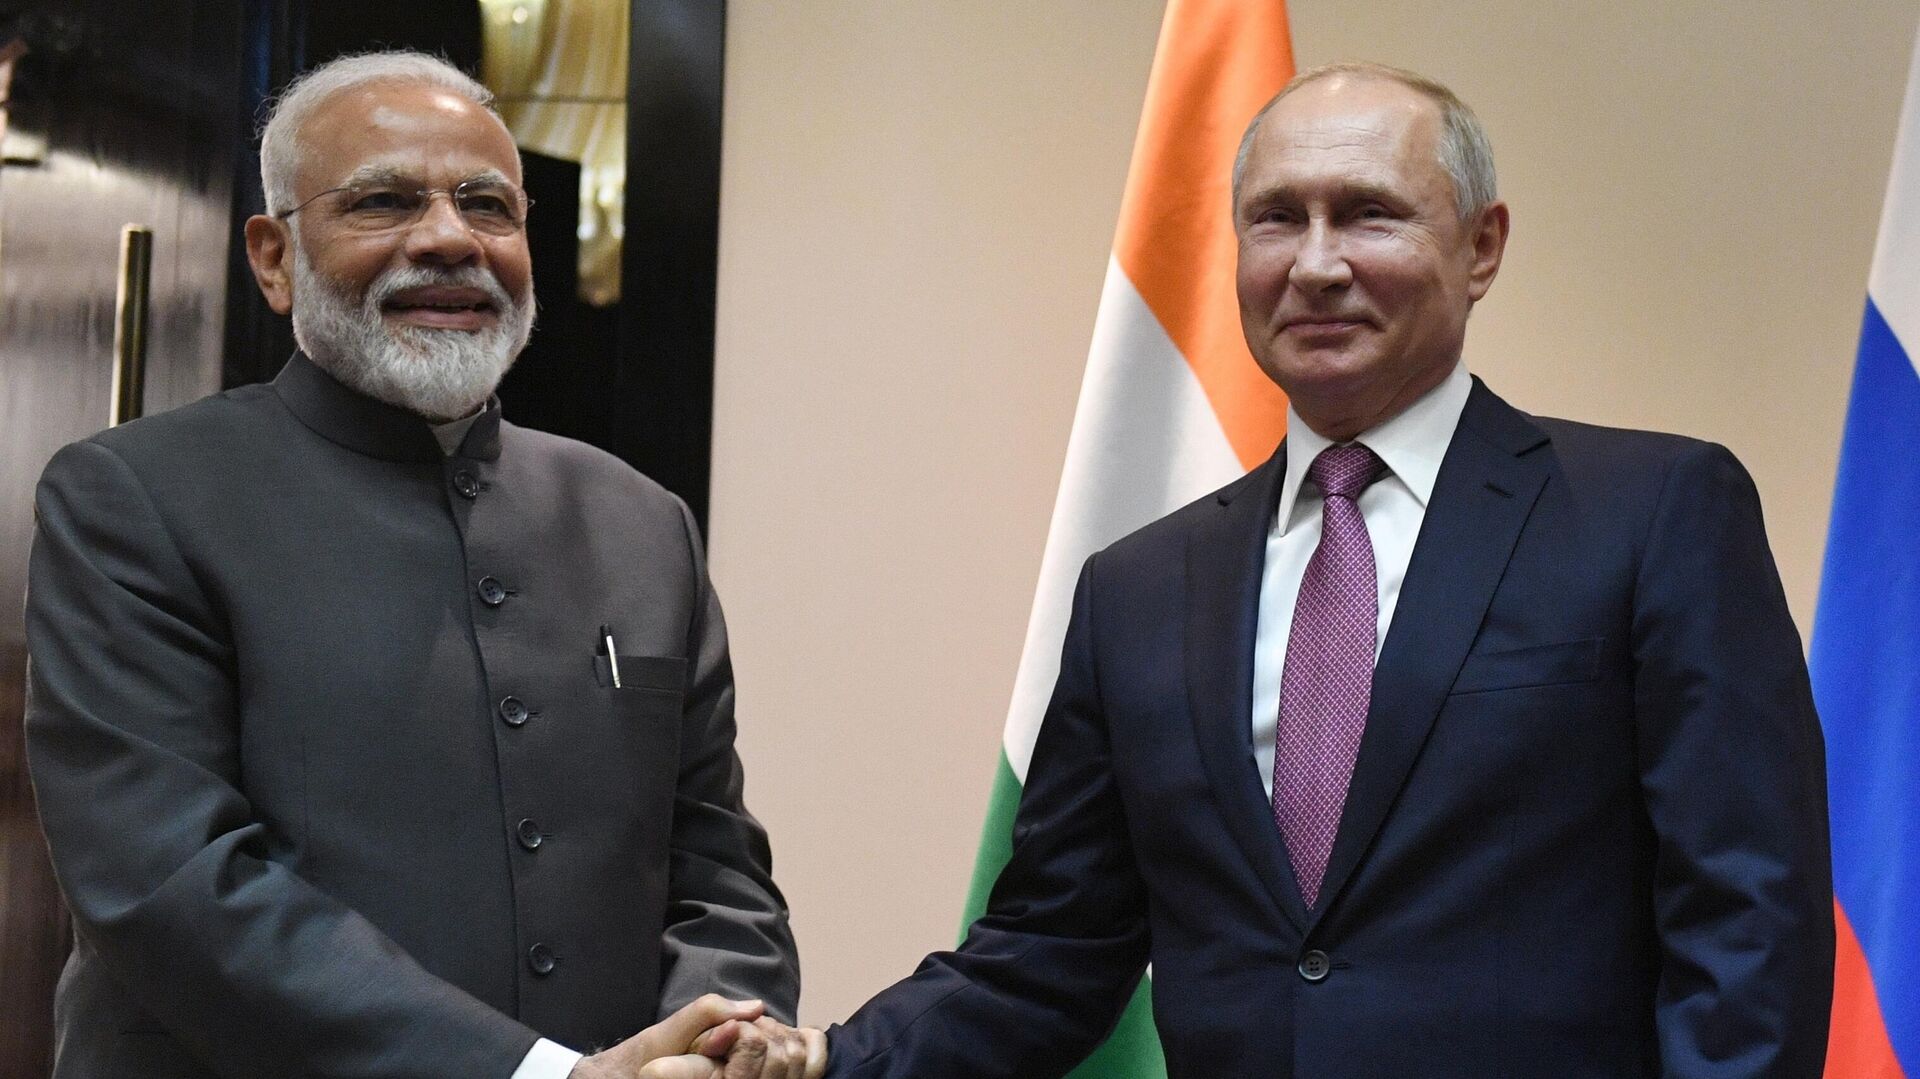 Russian President Vladimir Putin, right, and Indian Prime Minister Narendra Modi pose for a photo prior to their talks on a sideline of the Shanghai Cooperation Organization summit in Bishkek, Kyrgyzstan, June 13, 2019 - Sputnik India, 1920, 13.09.2023